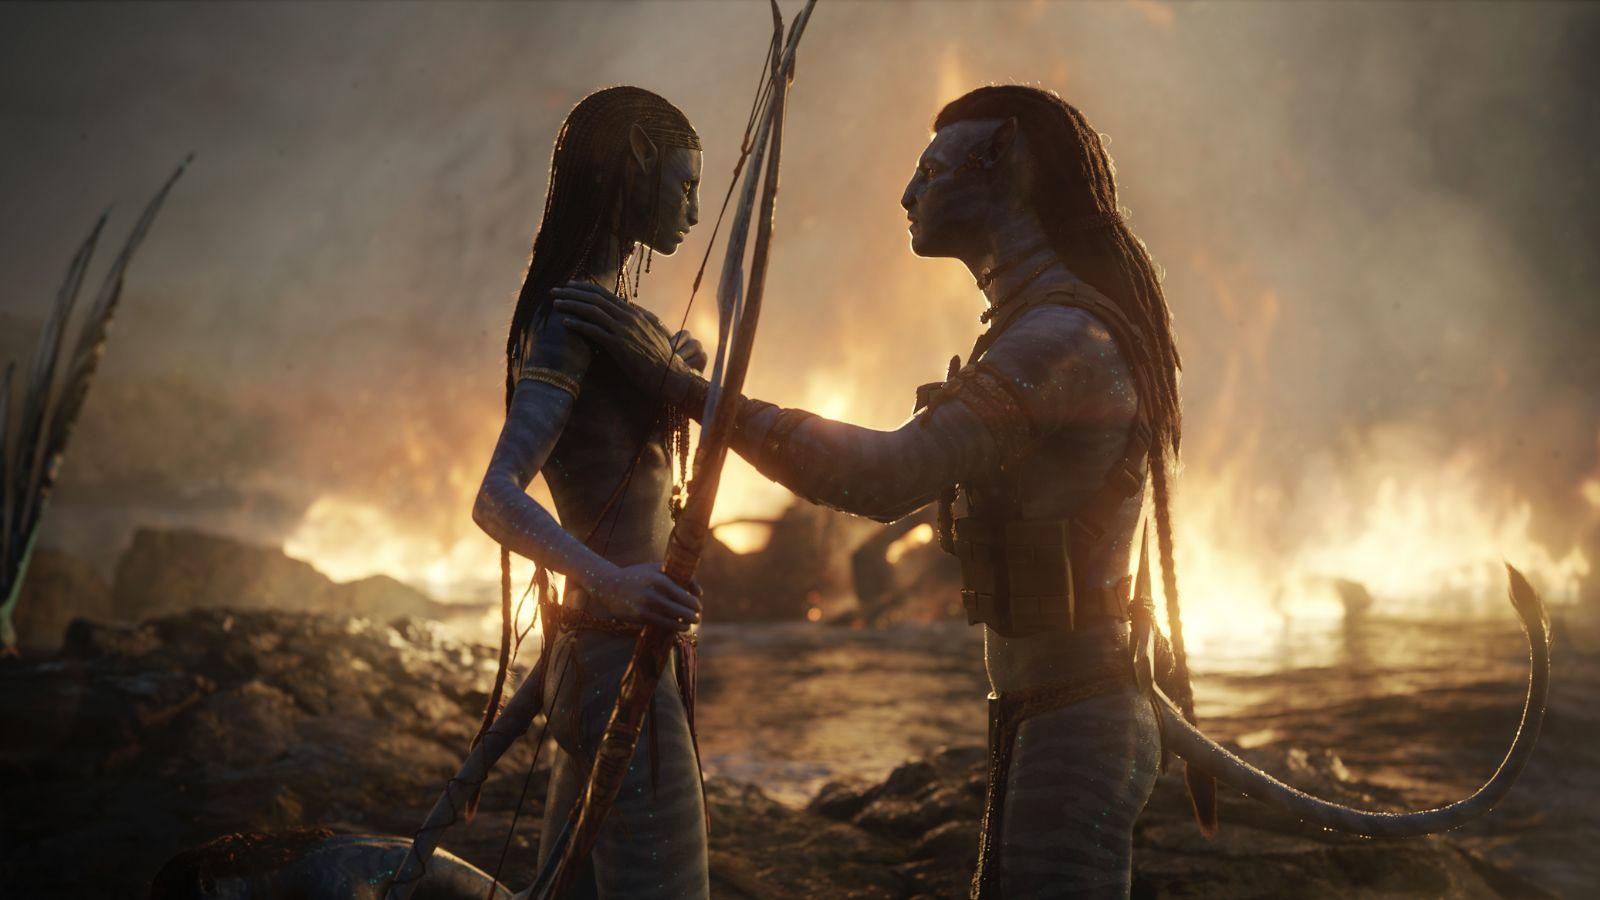 Jake Sully and Neytiri in Avatar 2. They stand with burning flames in the background.